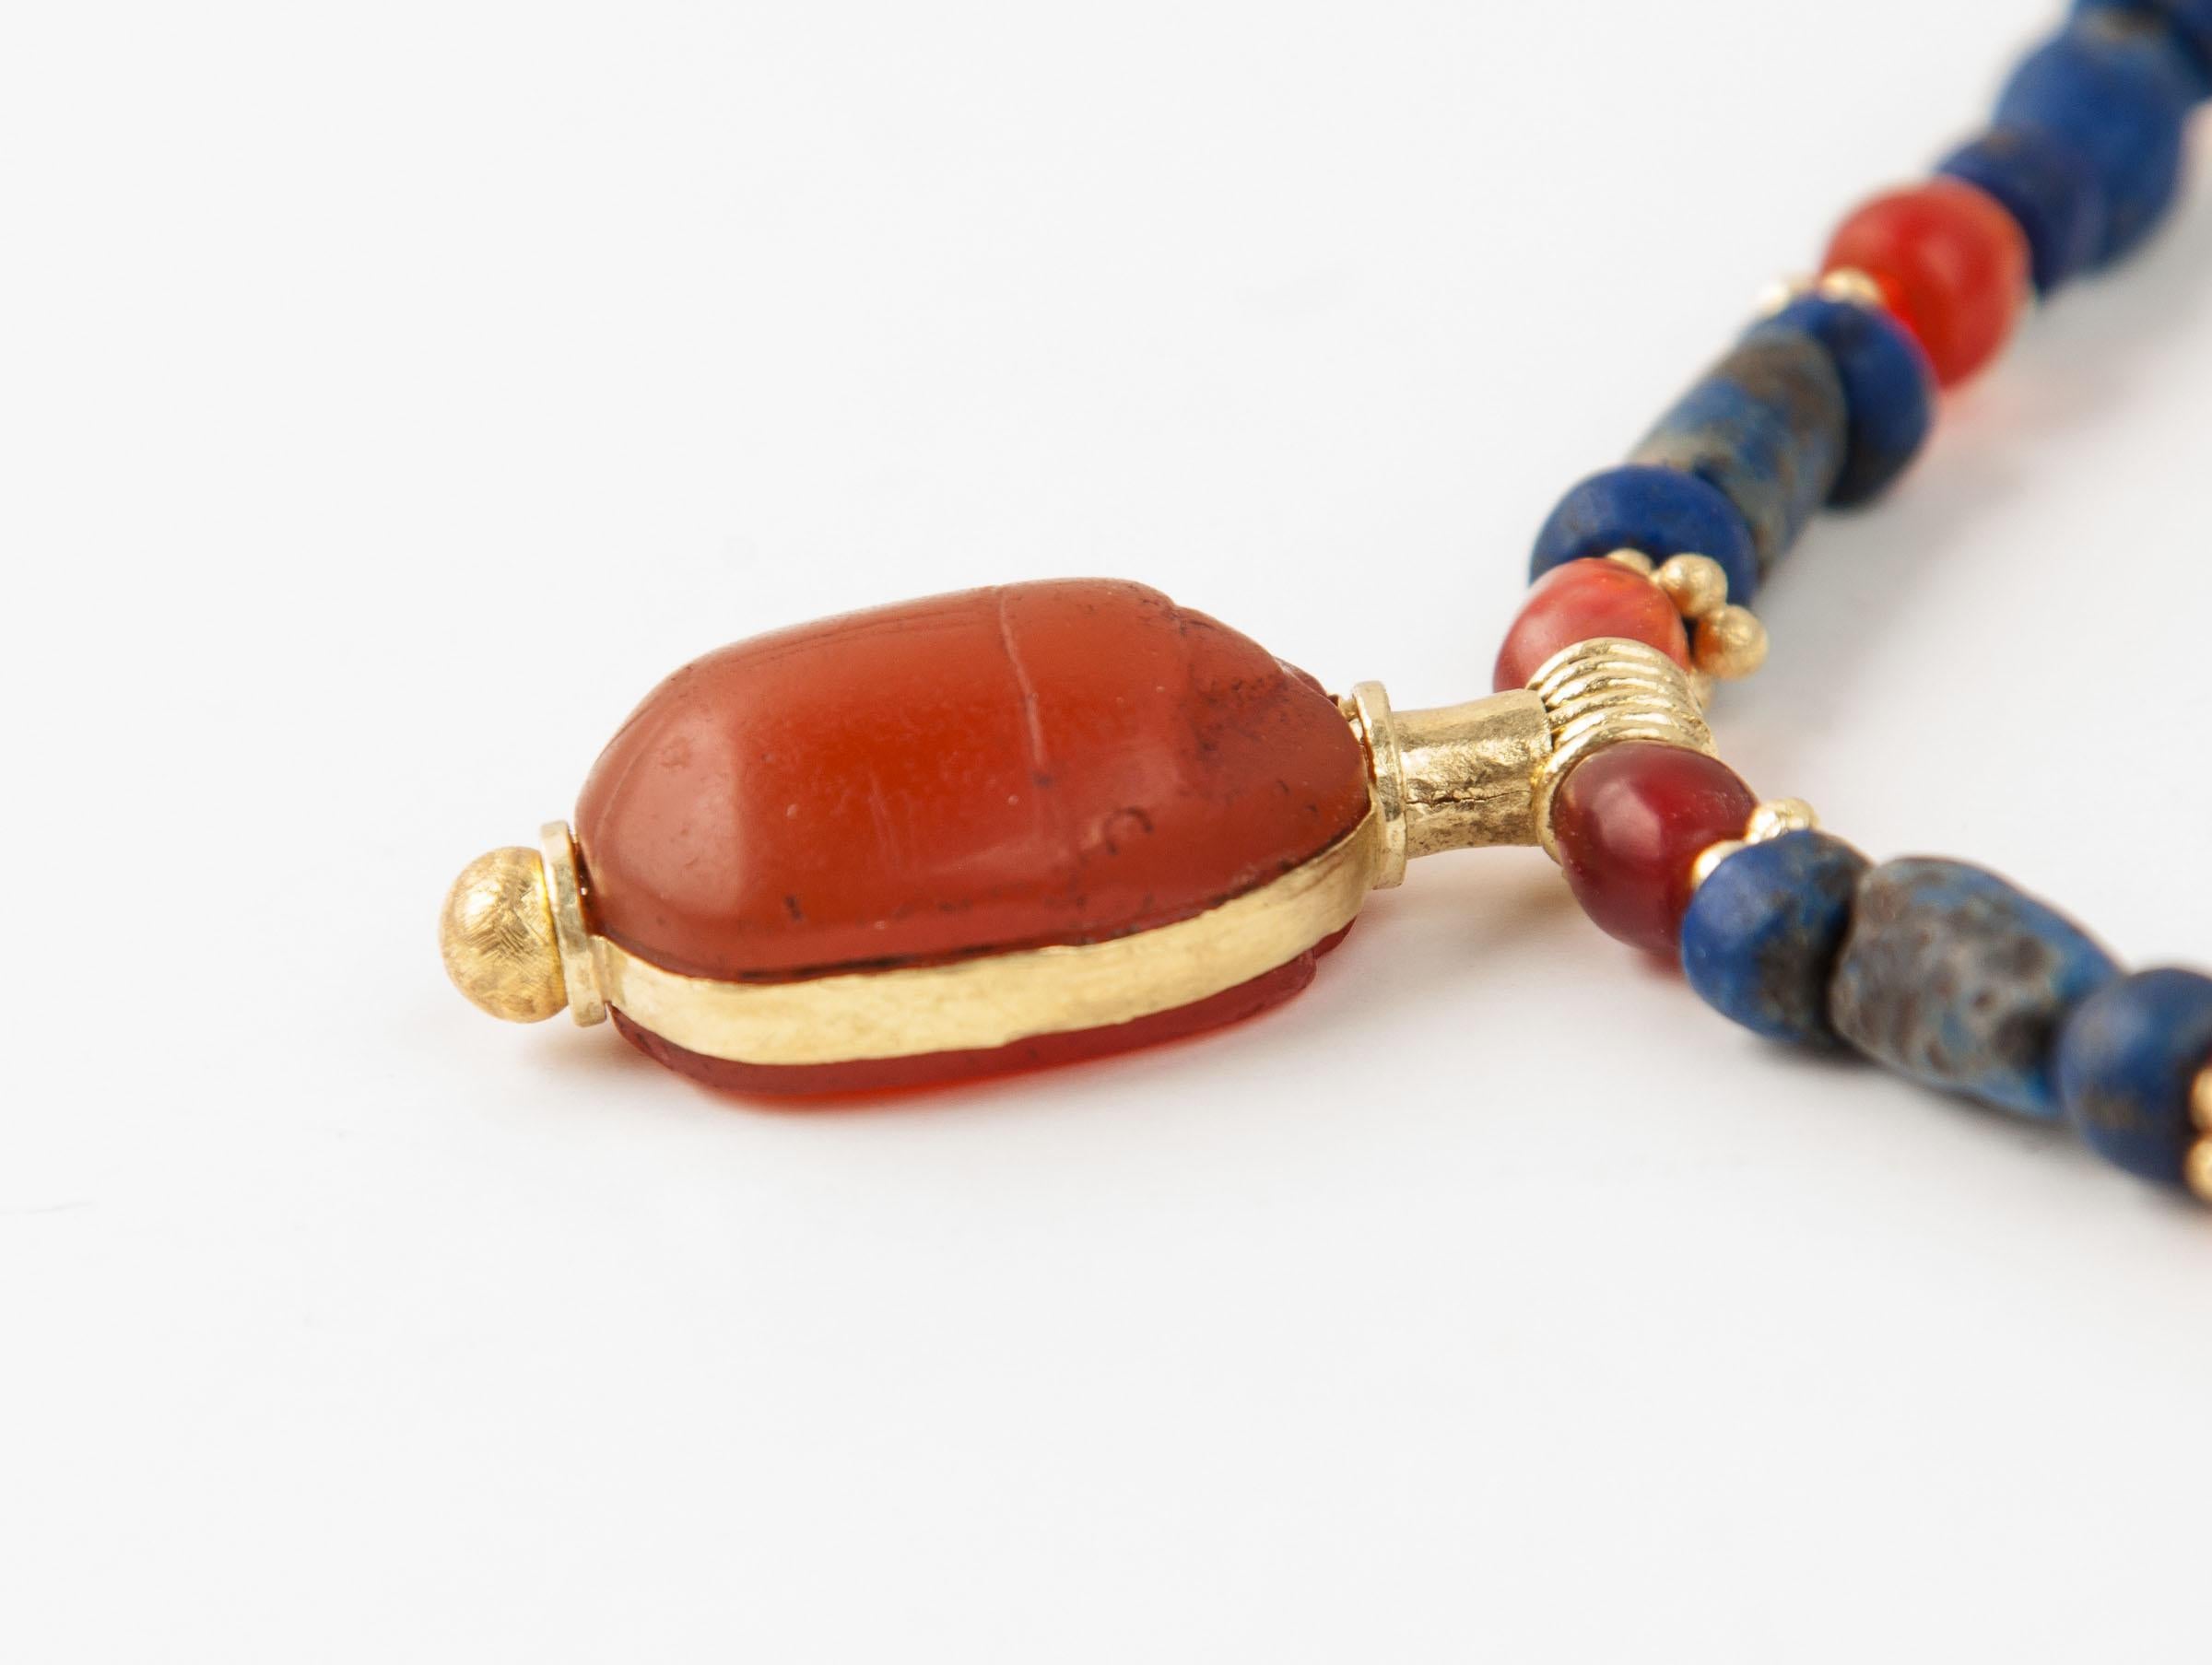 Ninety lapis lazuli beads, thirty-two carnelian beads and sixty granulated gold ring beads with a carnelian scarab pendant on a gold mount. The lapis lazuli beads are strung in groups of three with the center barrel bead flanked on either side with